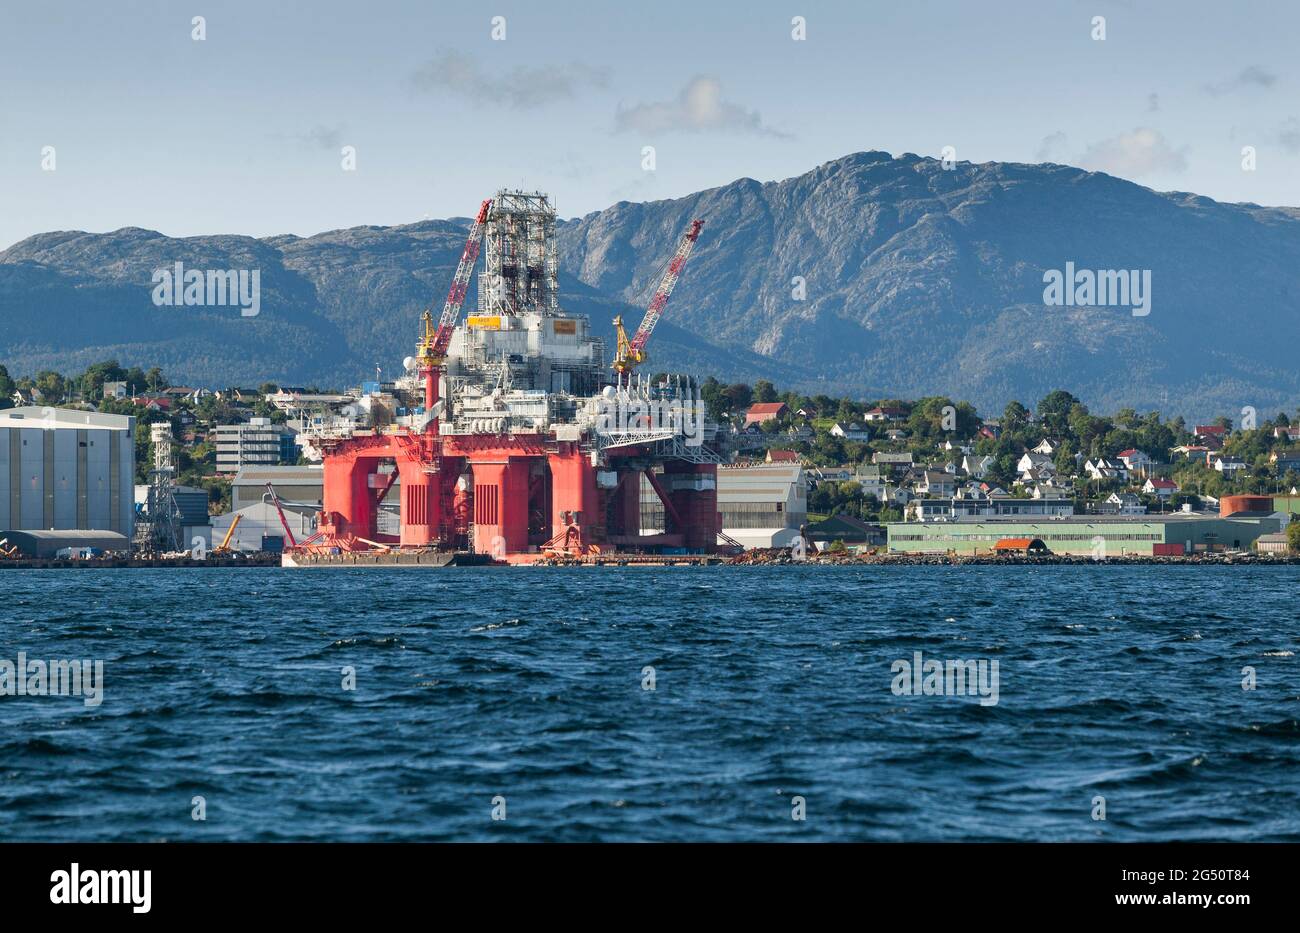 oil drilling rig under construction in a norwegian fjord Stock Photo